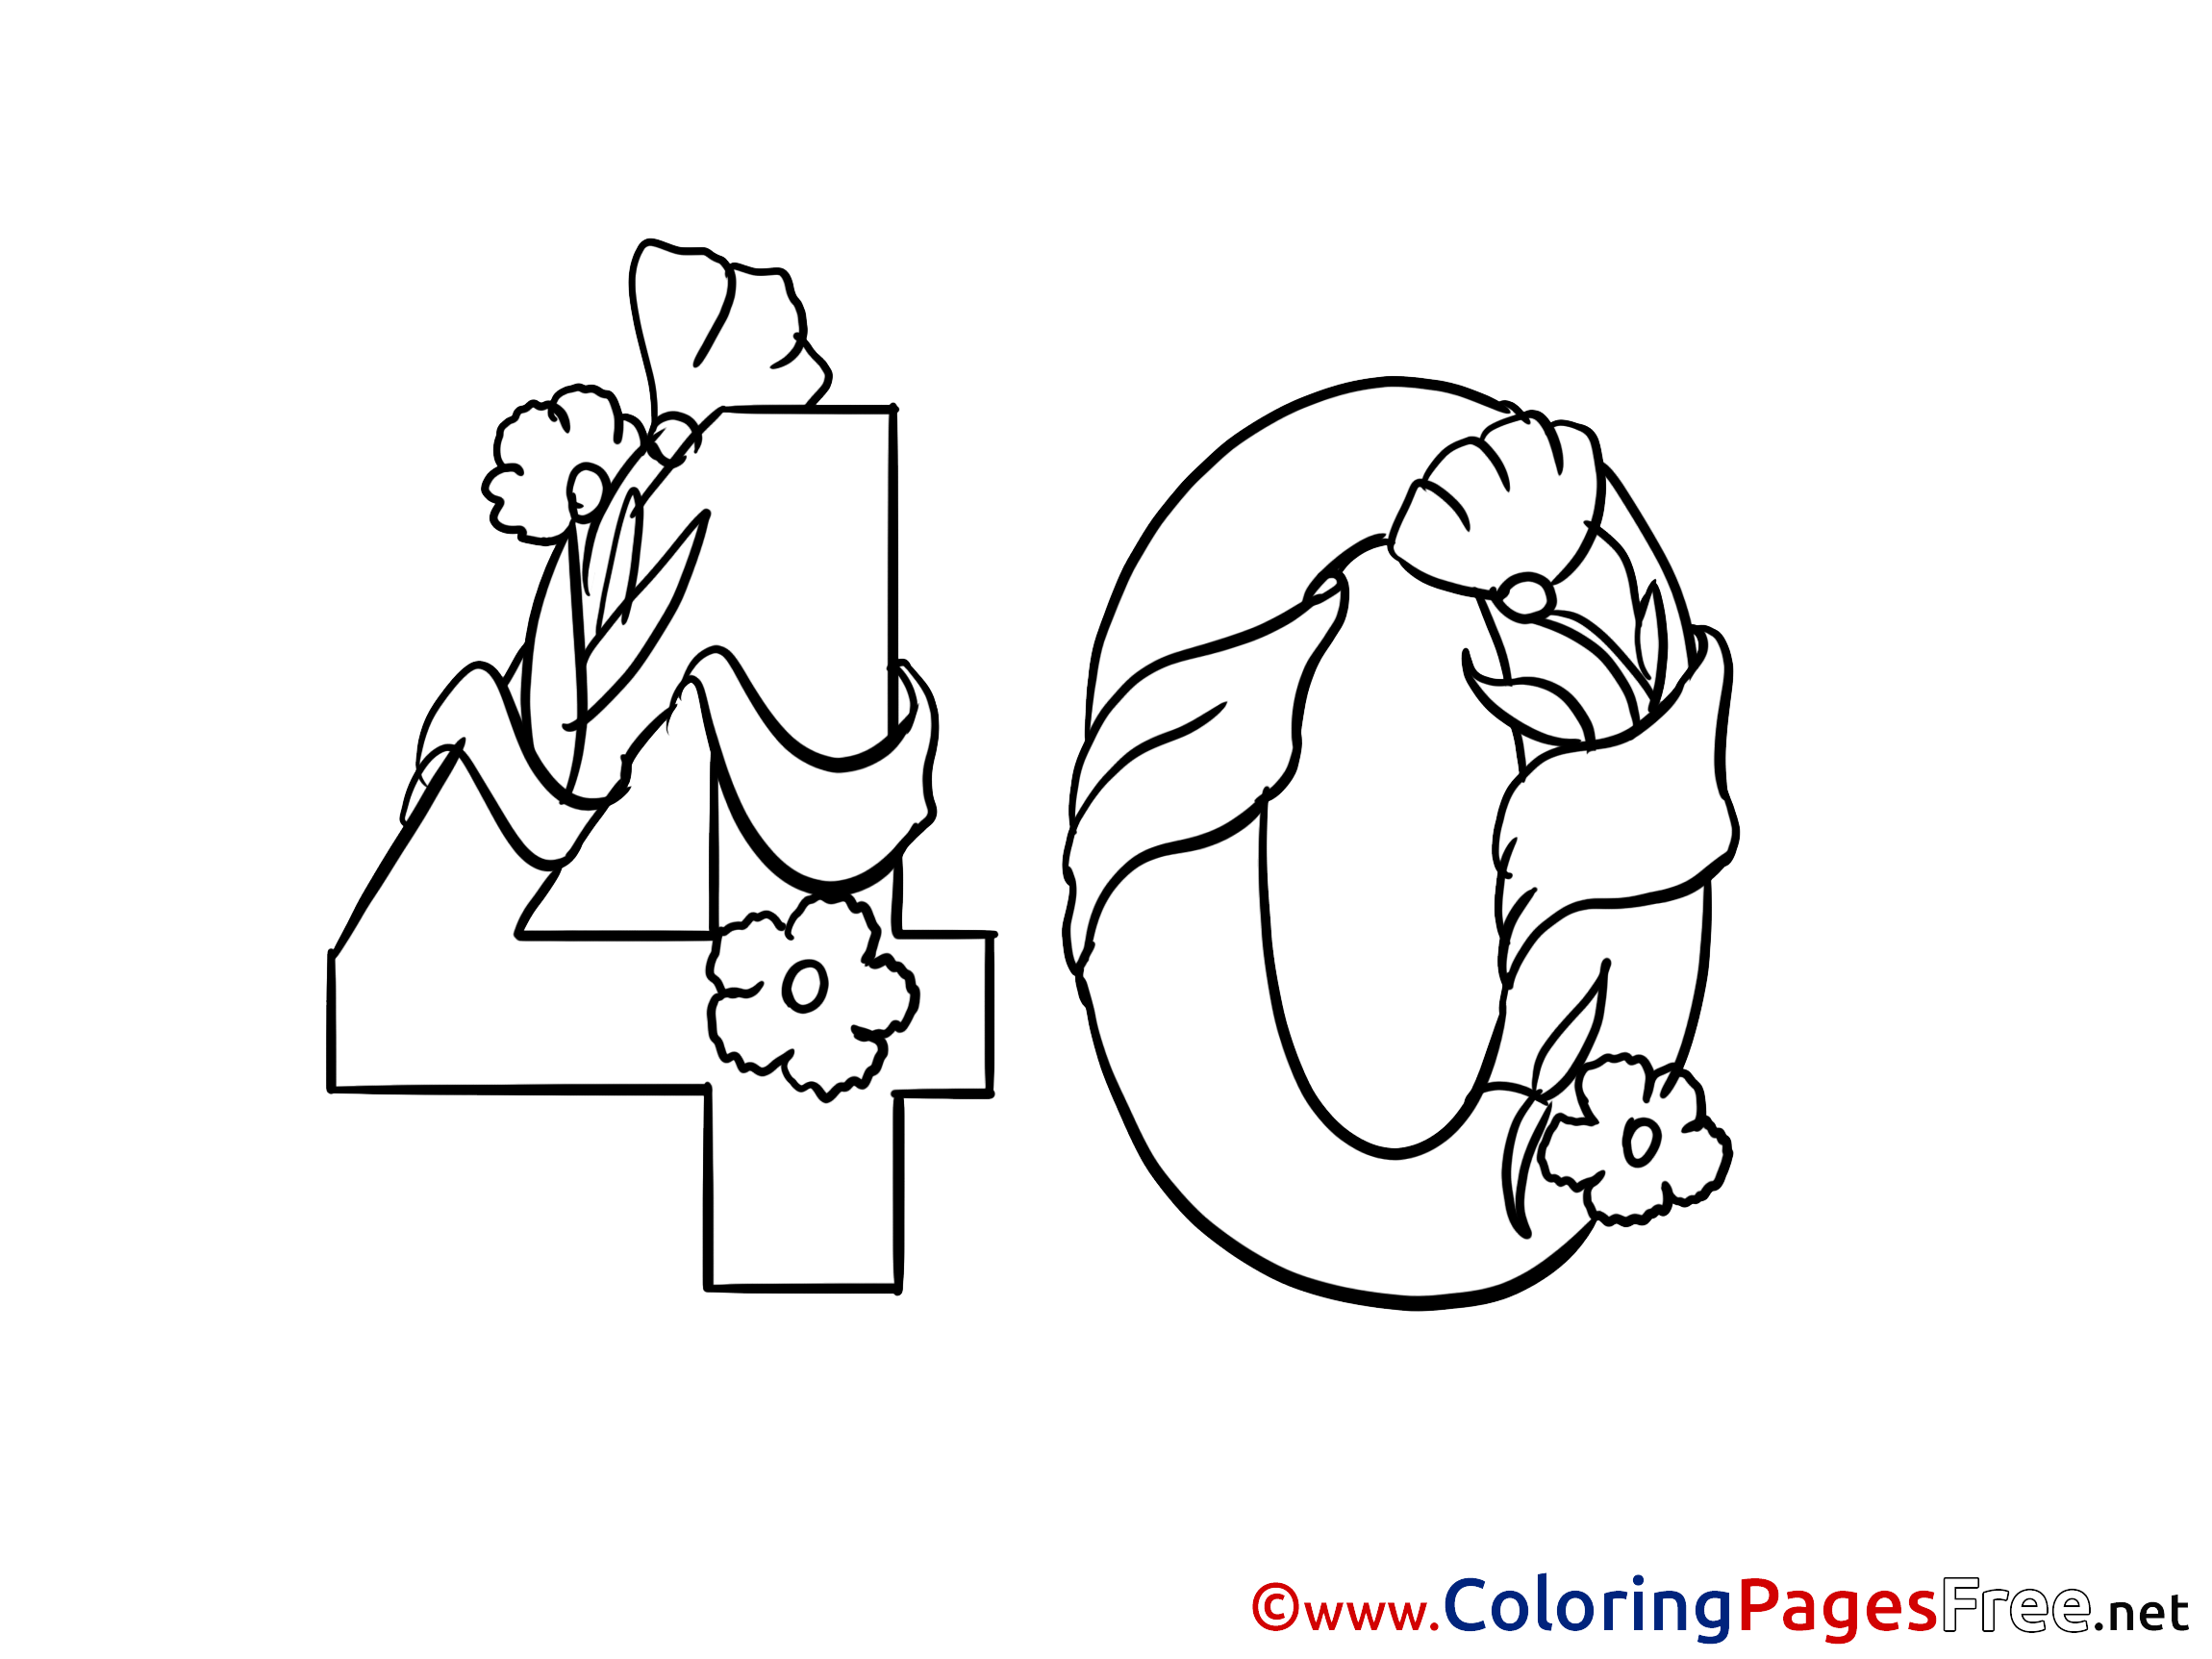 40-years-flowers-happy-birthday-coloring-pages-download